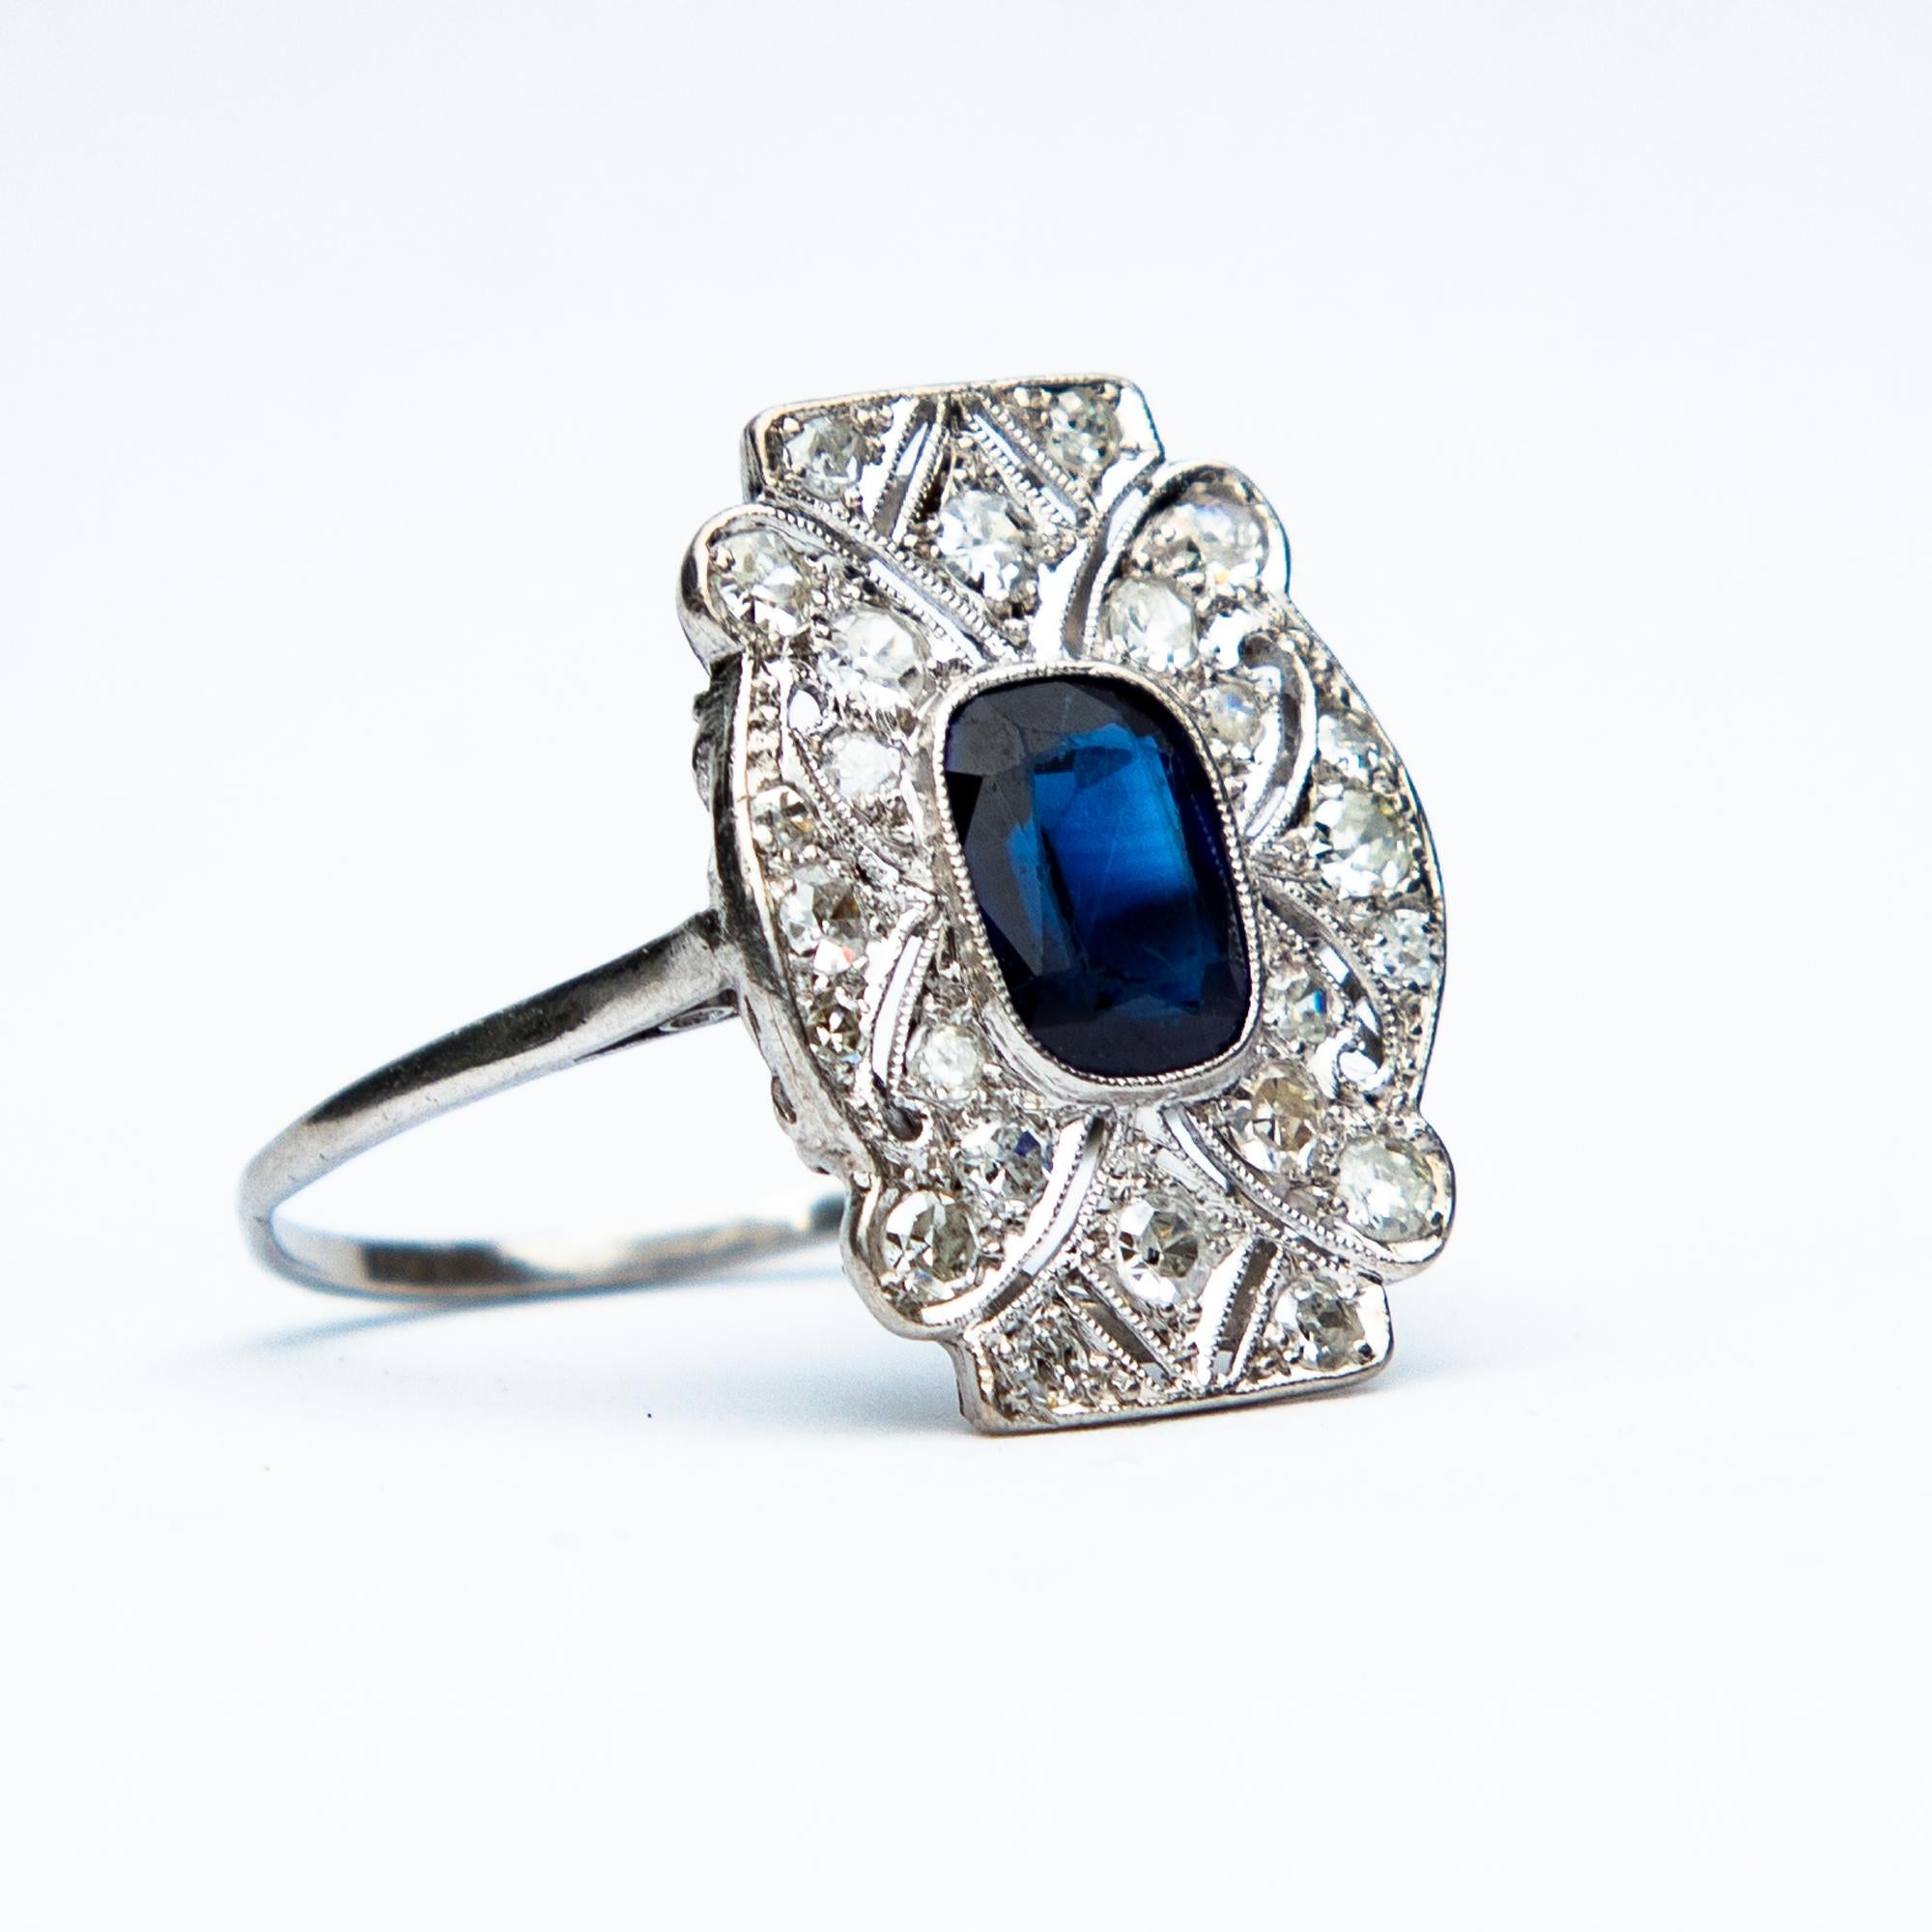 An astounding Art Deco Diamond and Natural Sapphire ring. 
The central sapphire measuring eighty five points, surrounded by old European cut Diamonds and sapphire accented corners. This wonderful piece is Platinum set.
The Diamonds are H colour and